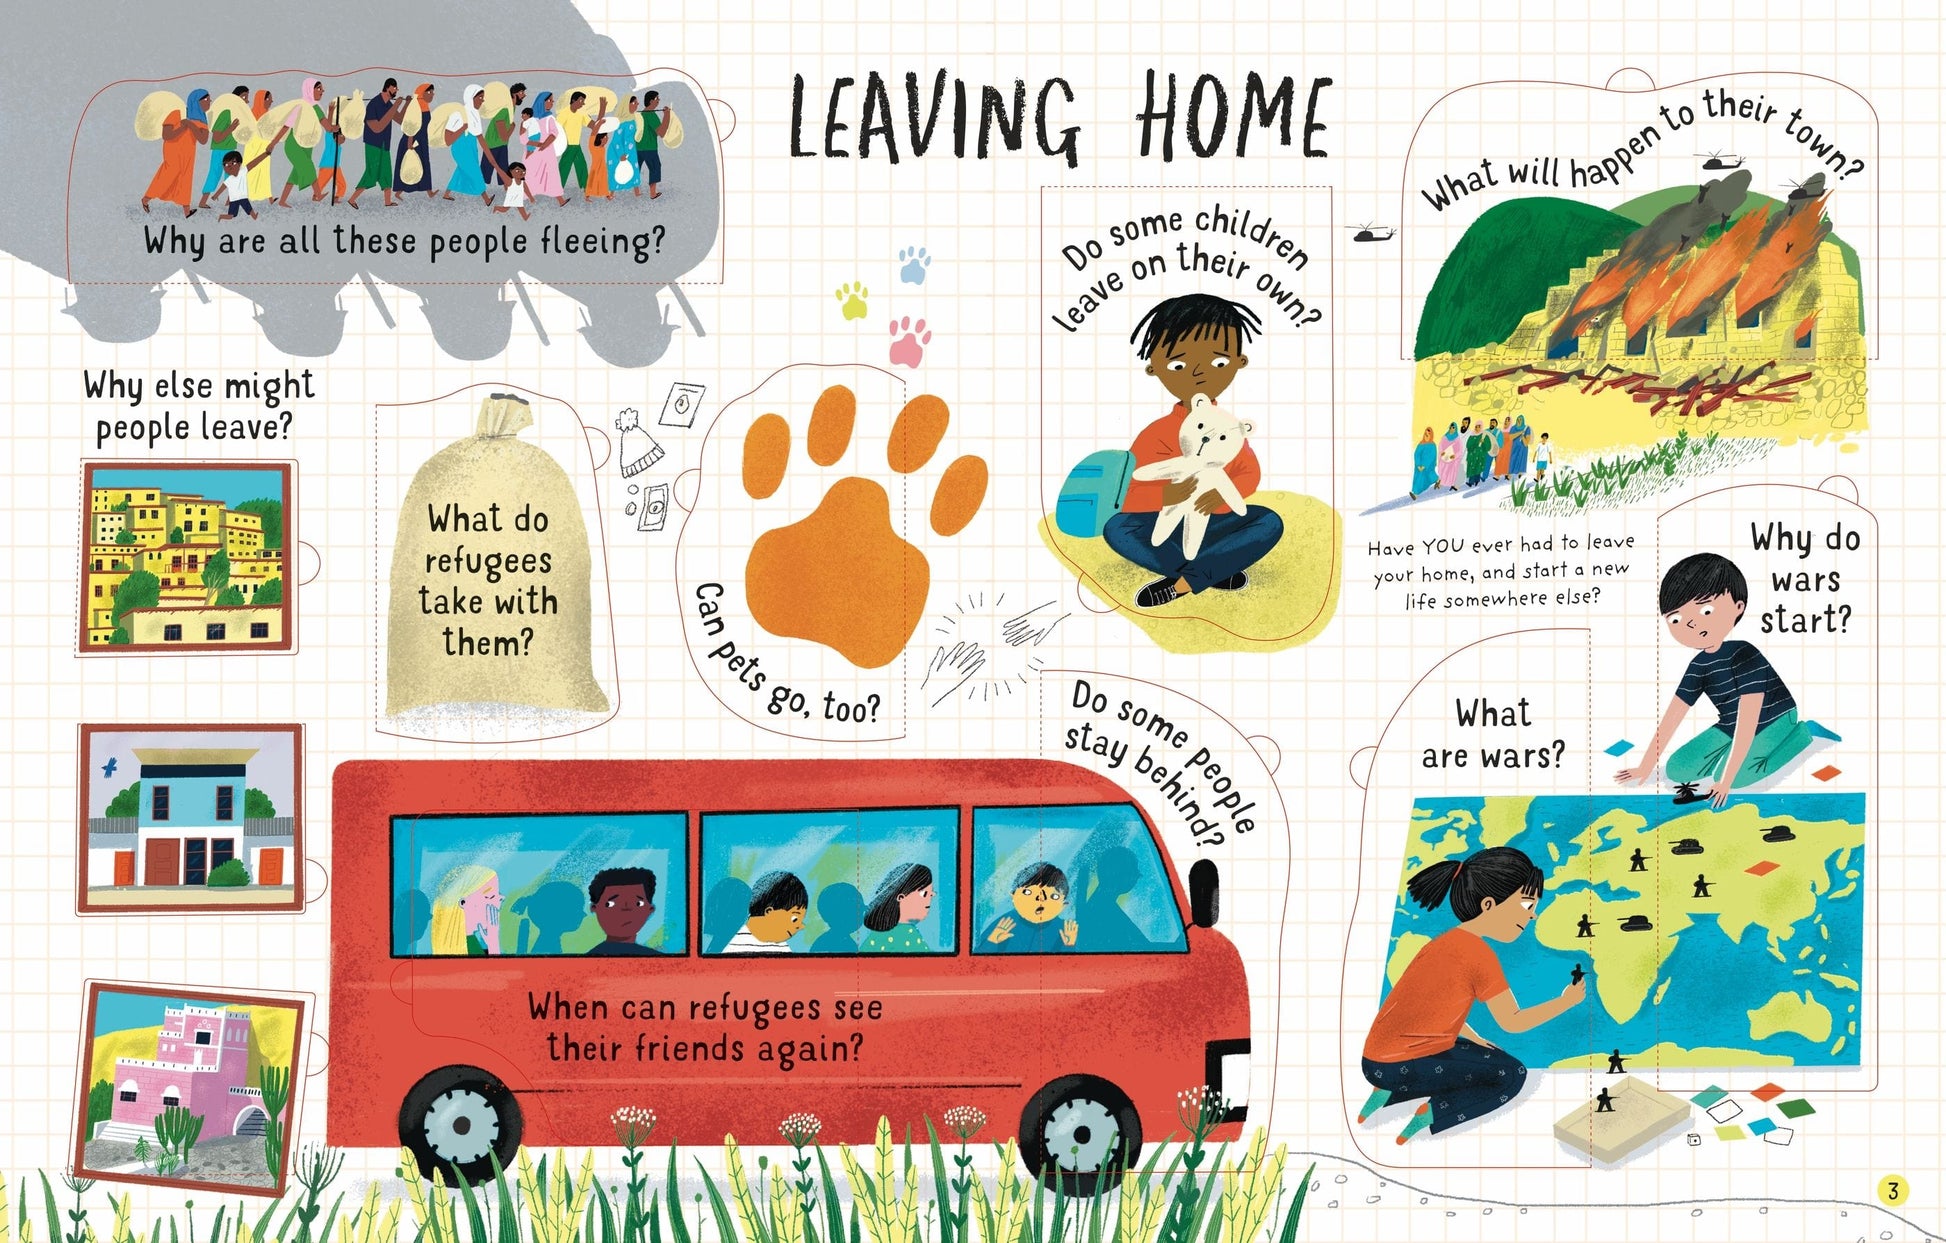 Usborne Lift-the-flap Questions and Answers about Refugees Katie Daynes, Ashe de Sousa  Illustrated by Oksana Drachkovska